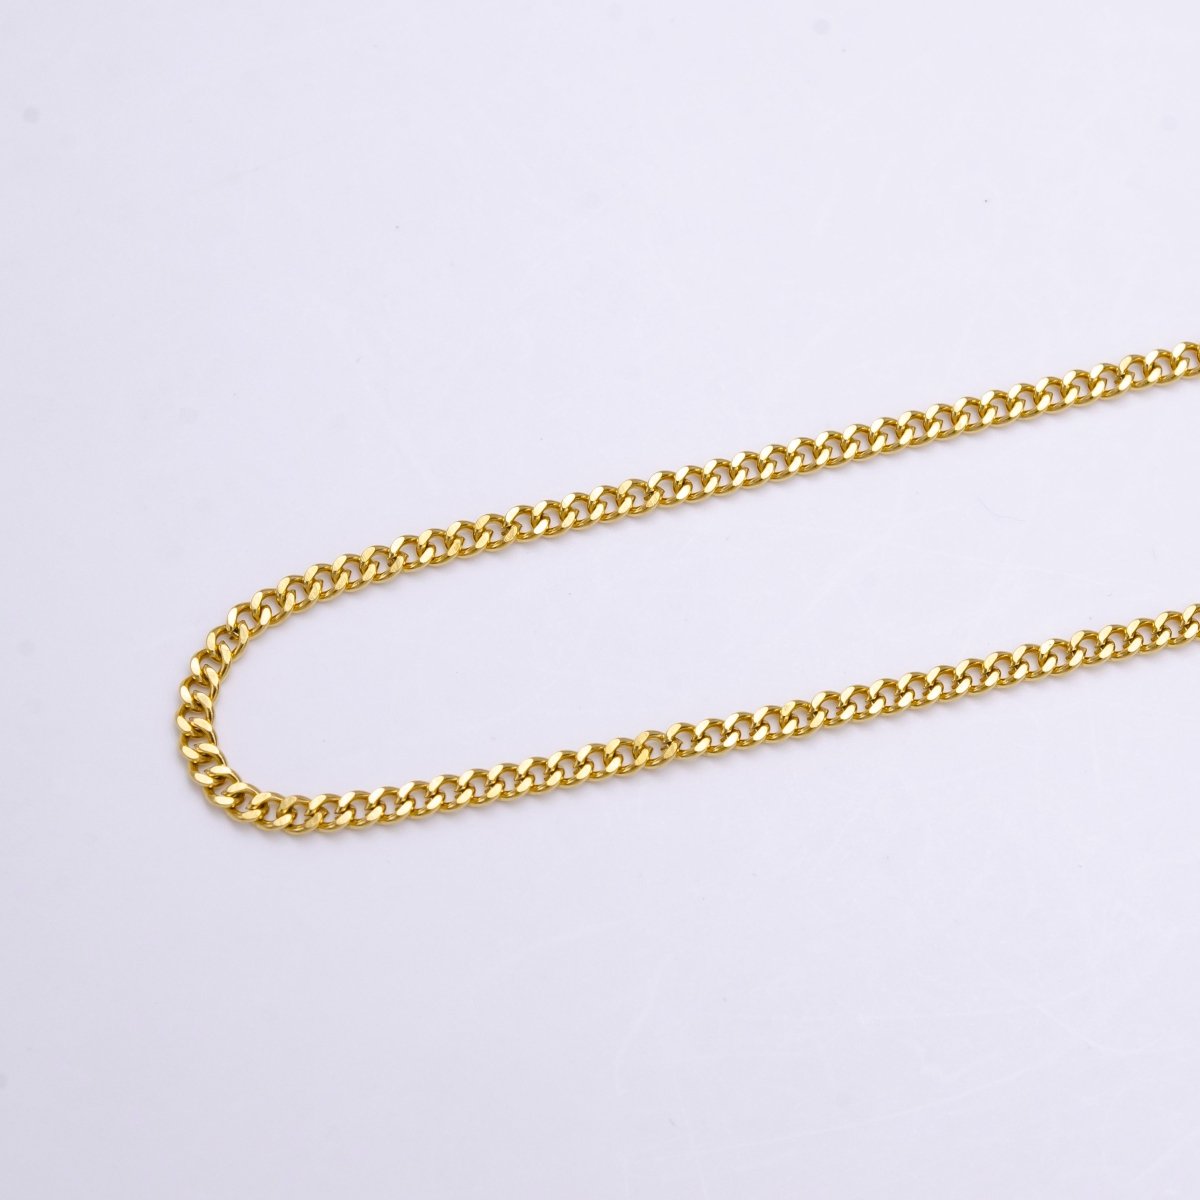 16K Gold Filled Curb Link Chain 2.2mm Width Unfinished Chain By Yard For Jewelry Making | ROLL-1388 - DLUXCA